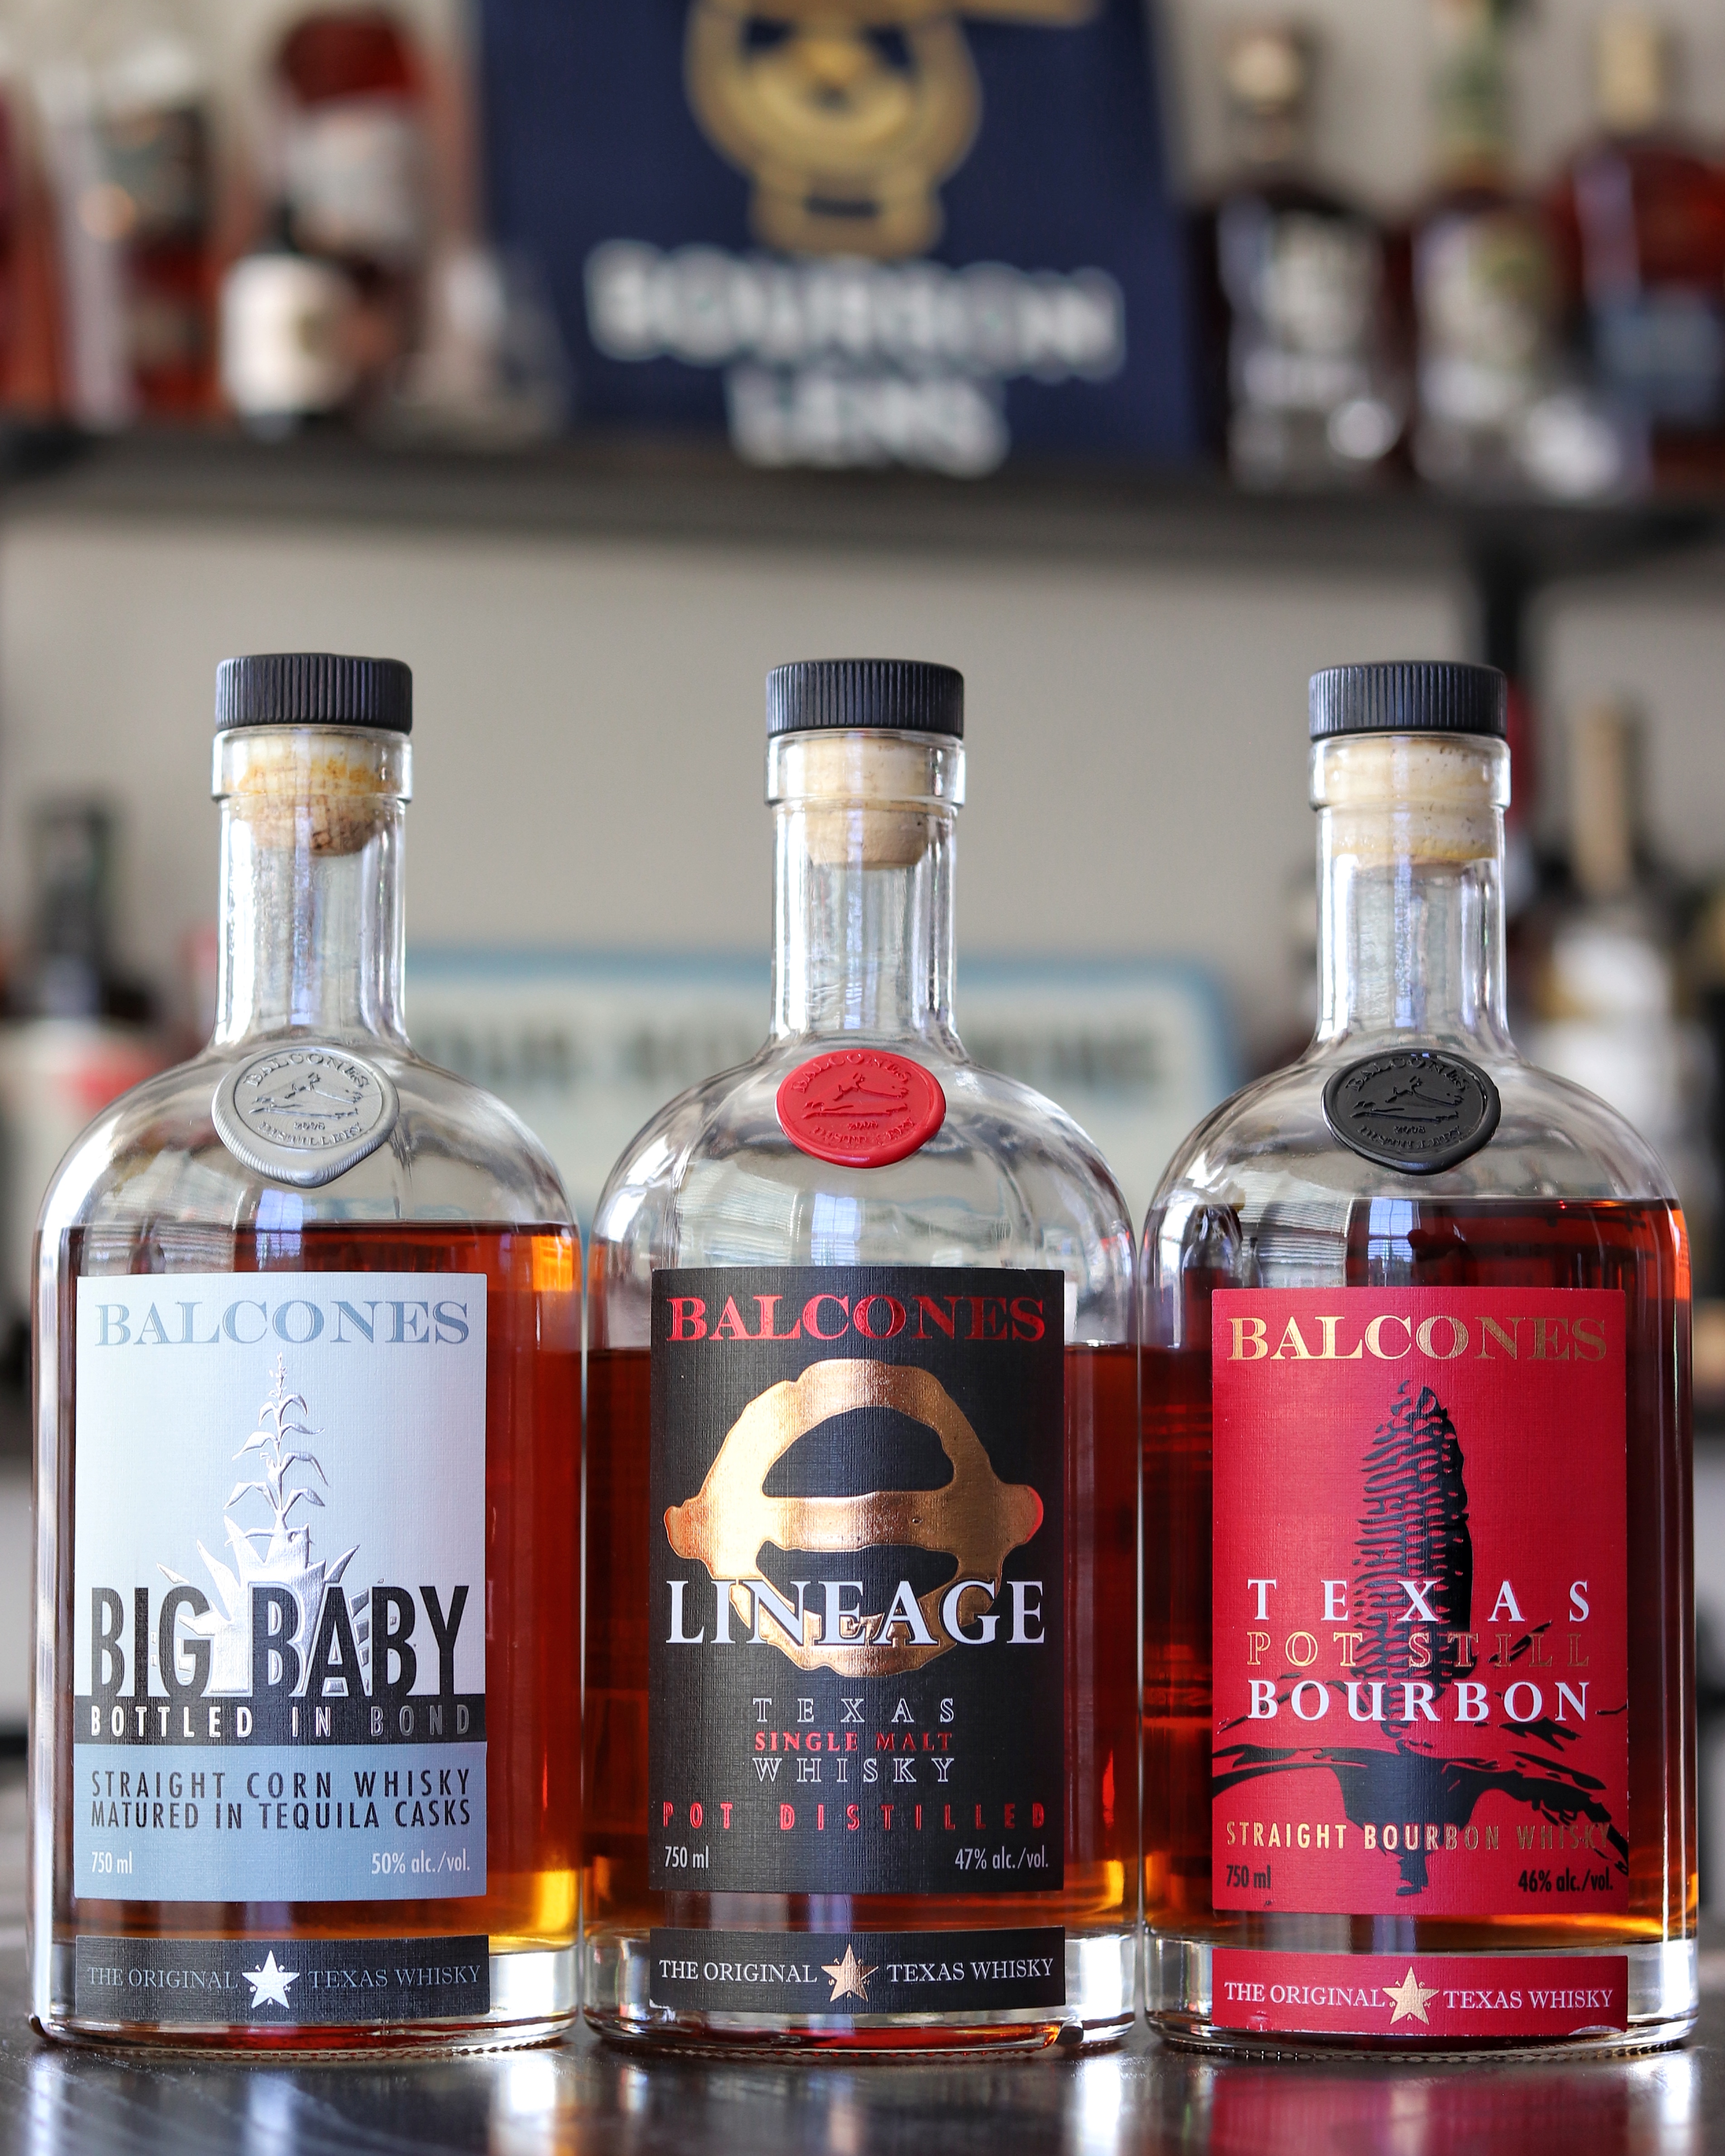 189: Balcones Distilling Setting The Standard For Texas Whisky